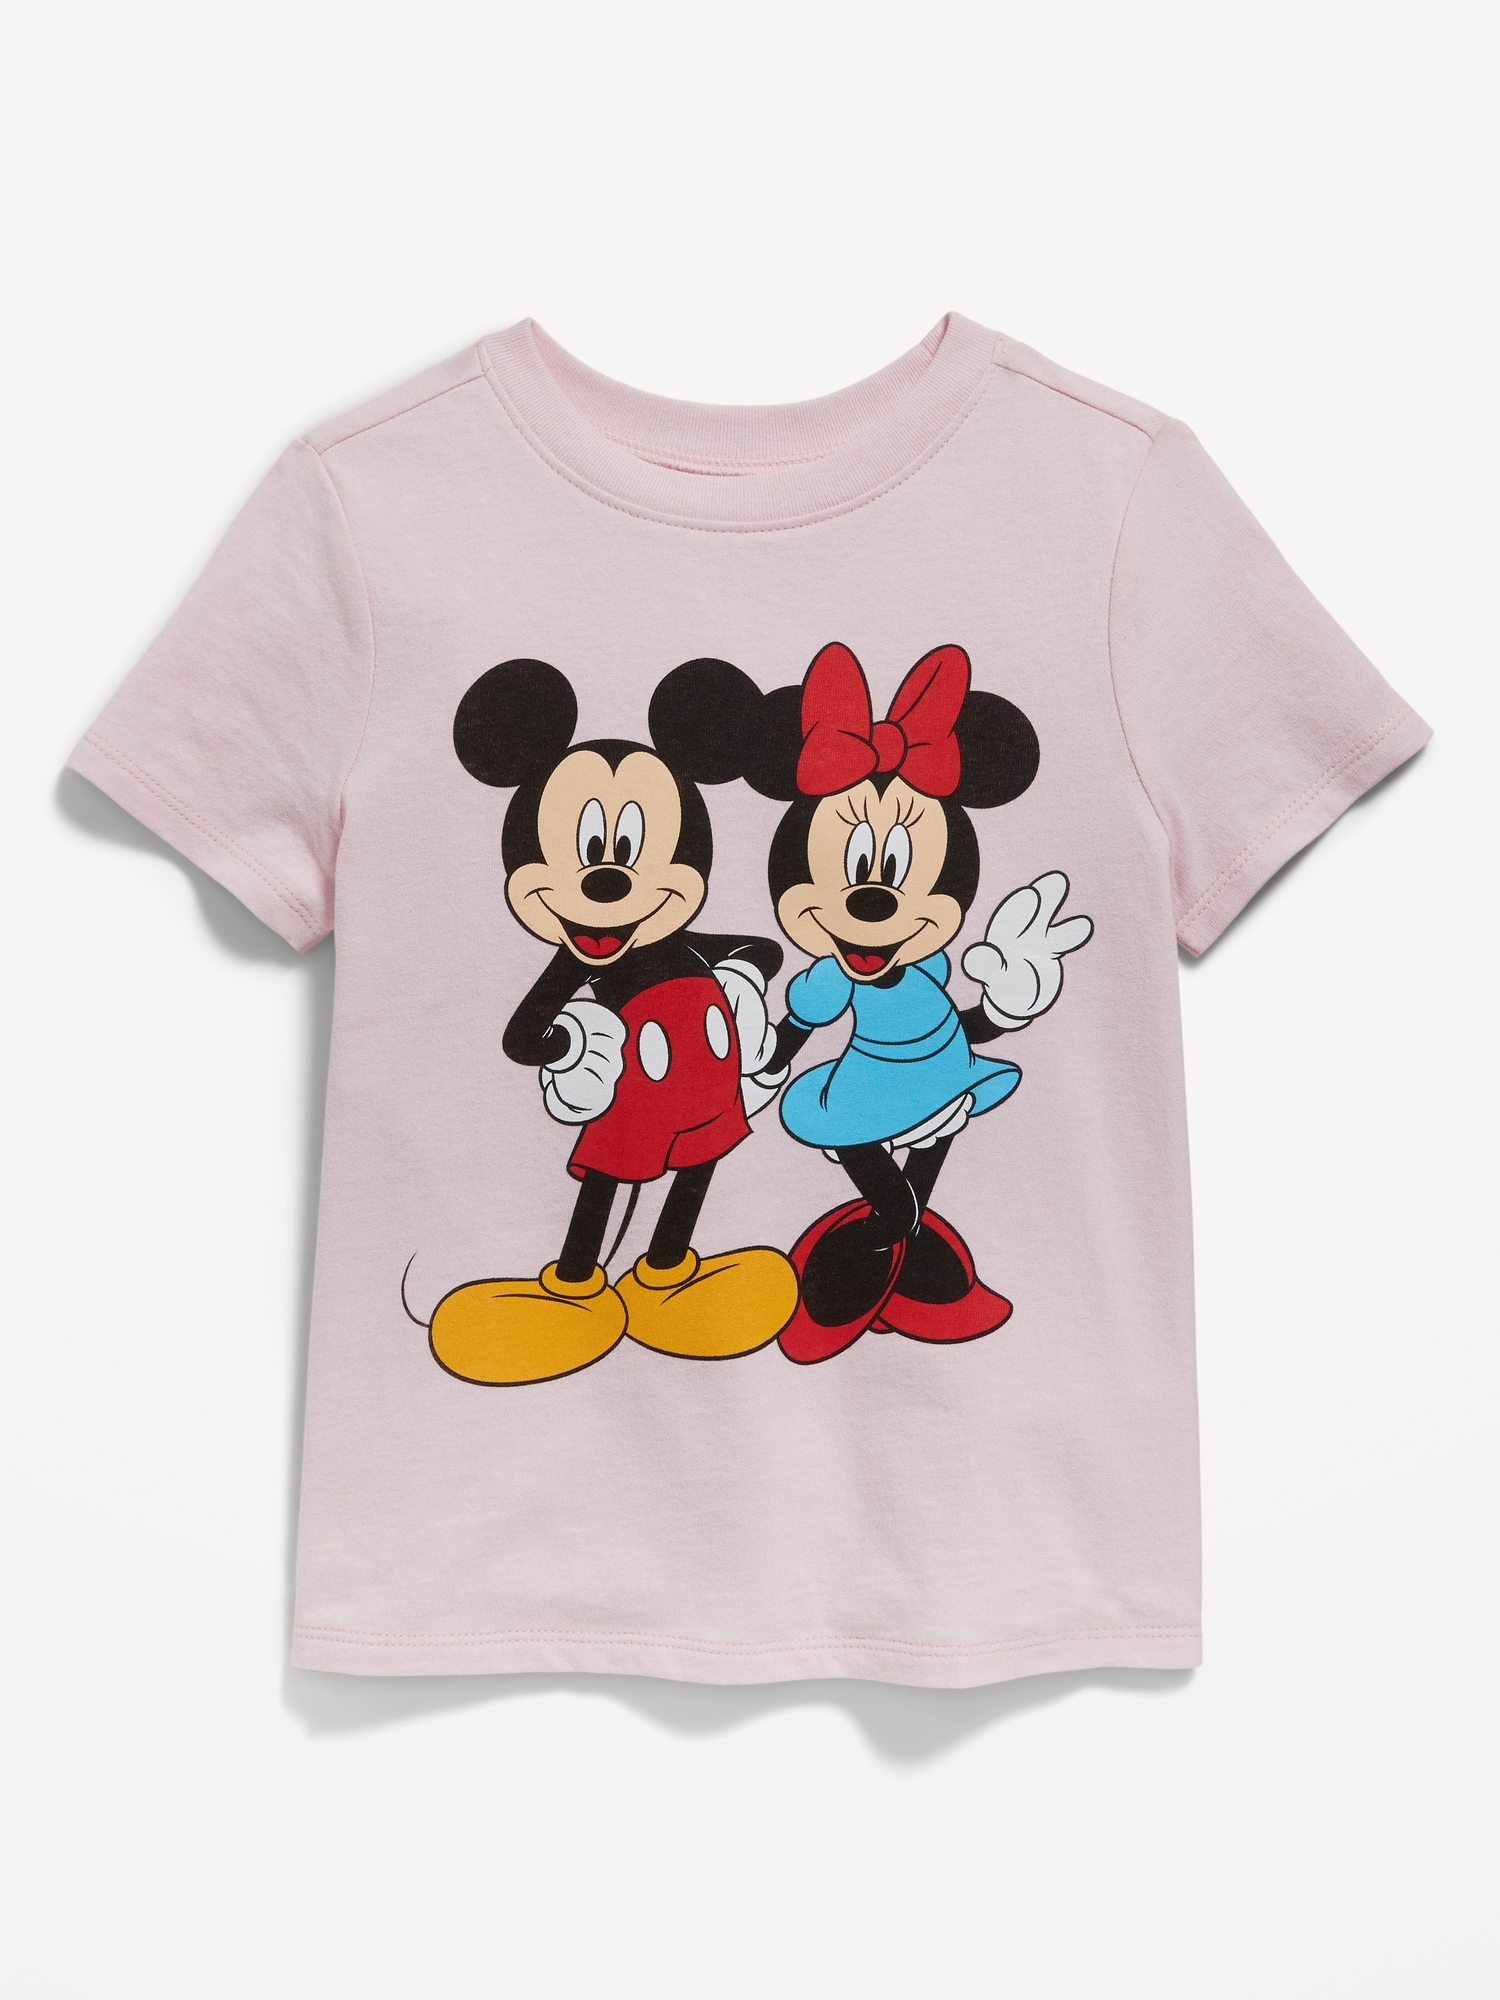 Disney© Mickey and Minnie Mouse Unisex T-Shirt for Toddler